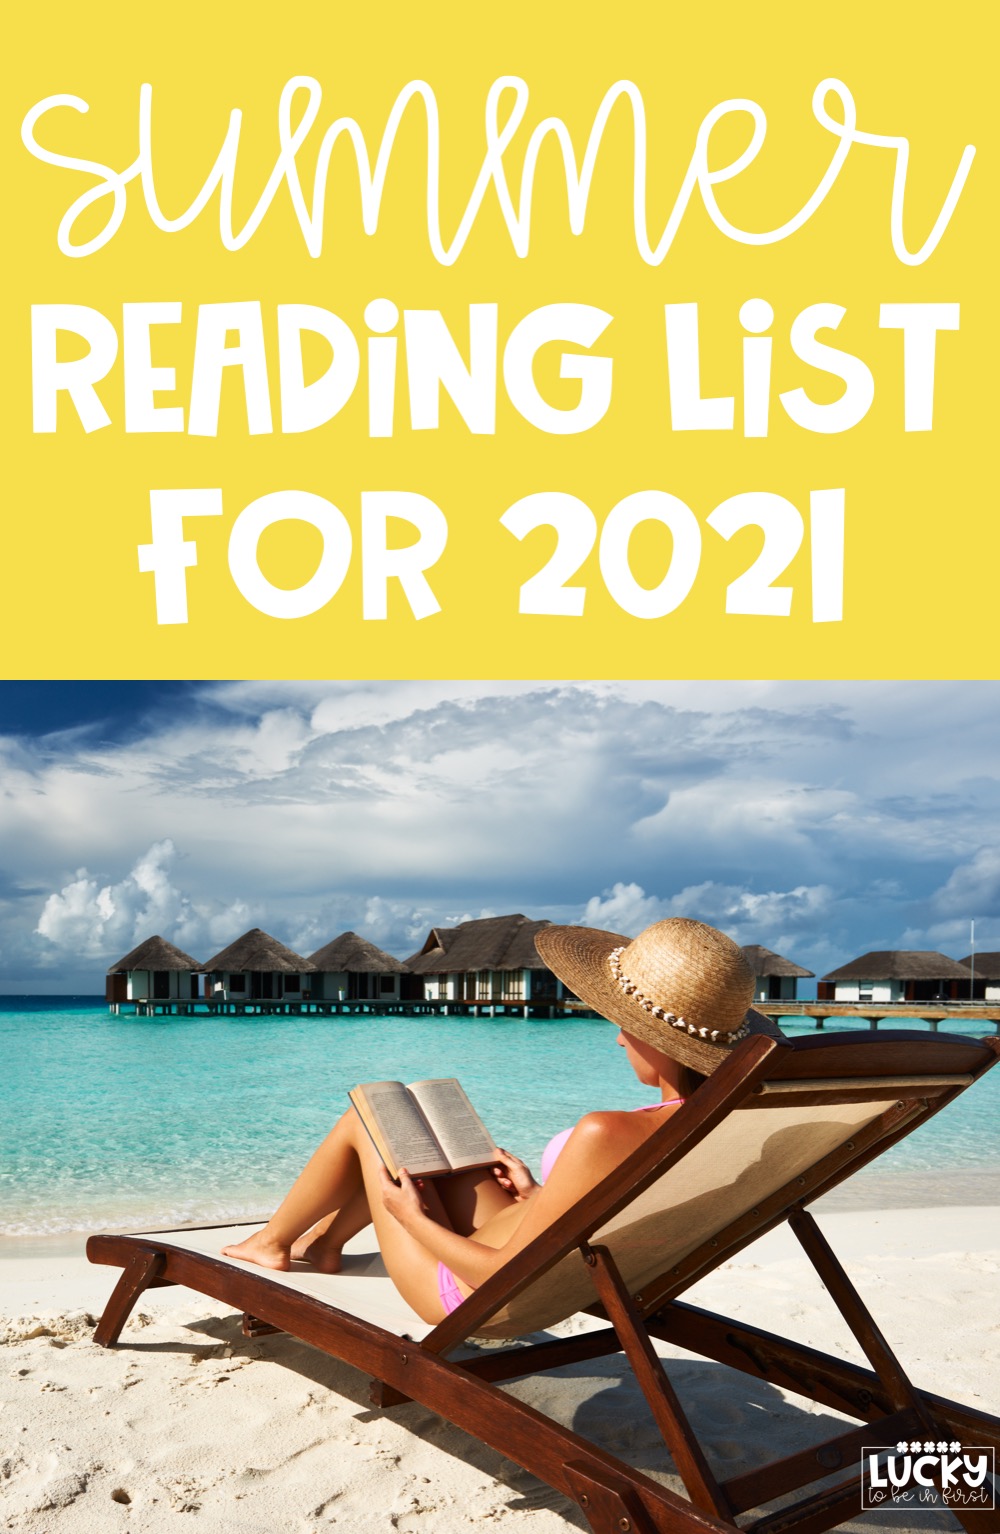 Summer is here and it's time to read all the books! Check out my summer reading list for 2021!